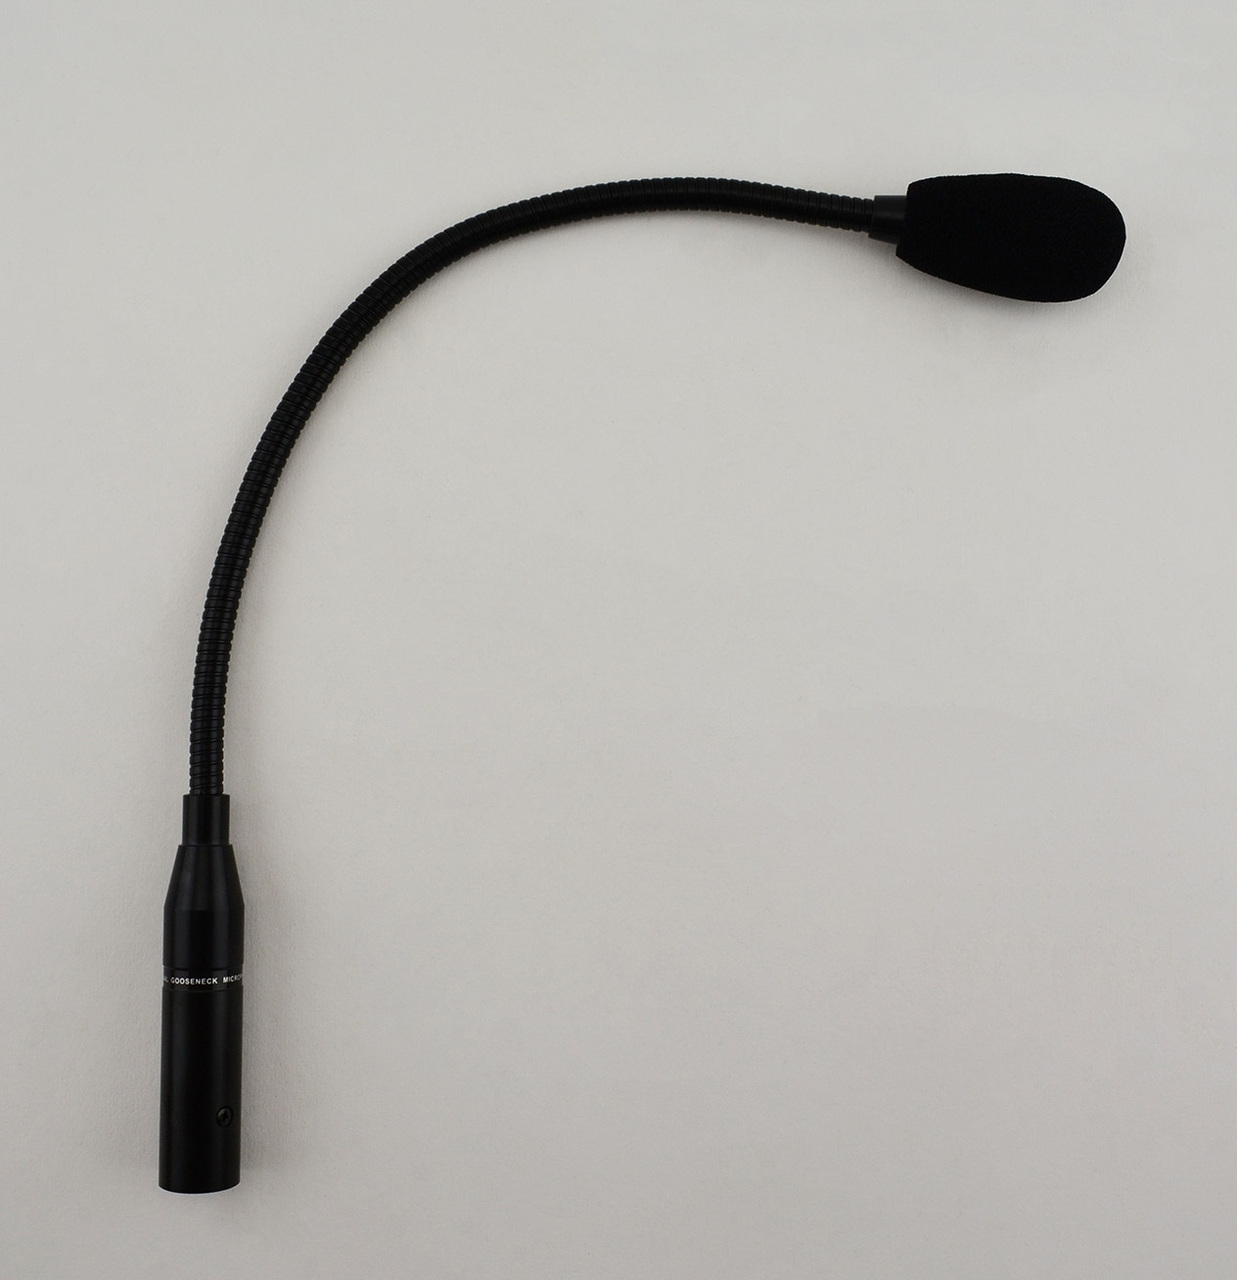 16 INCH GOOSENECK MICROPHONE USED WITH PERFORMANCE SERIES & D20 FLEX, Fits 3M